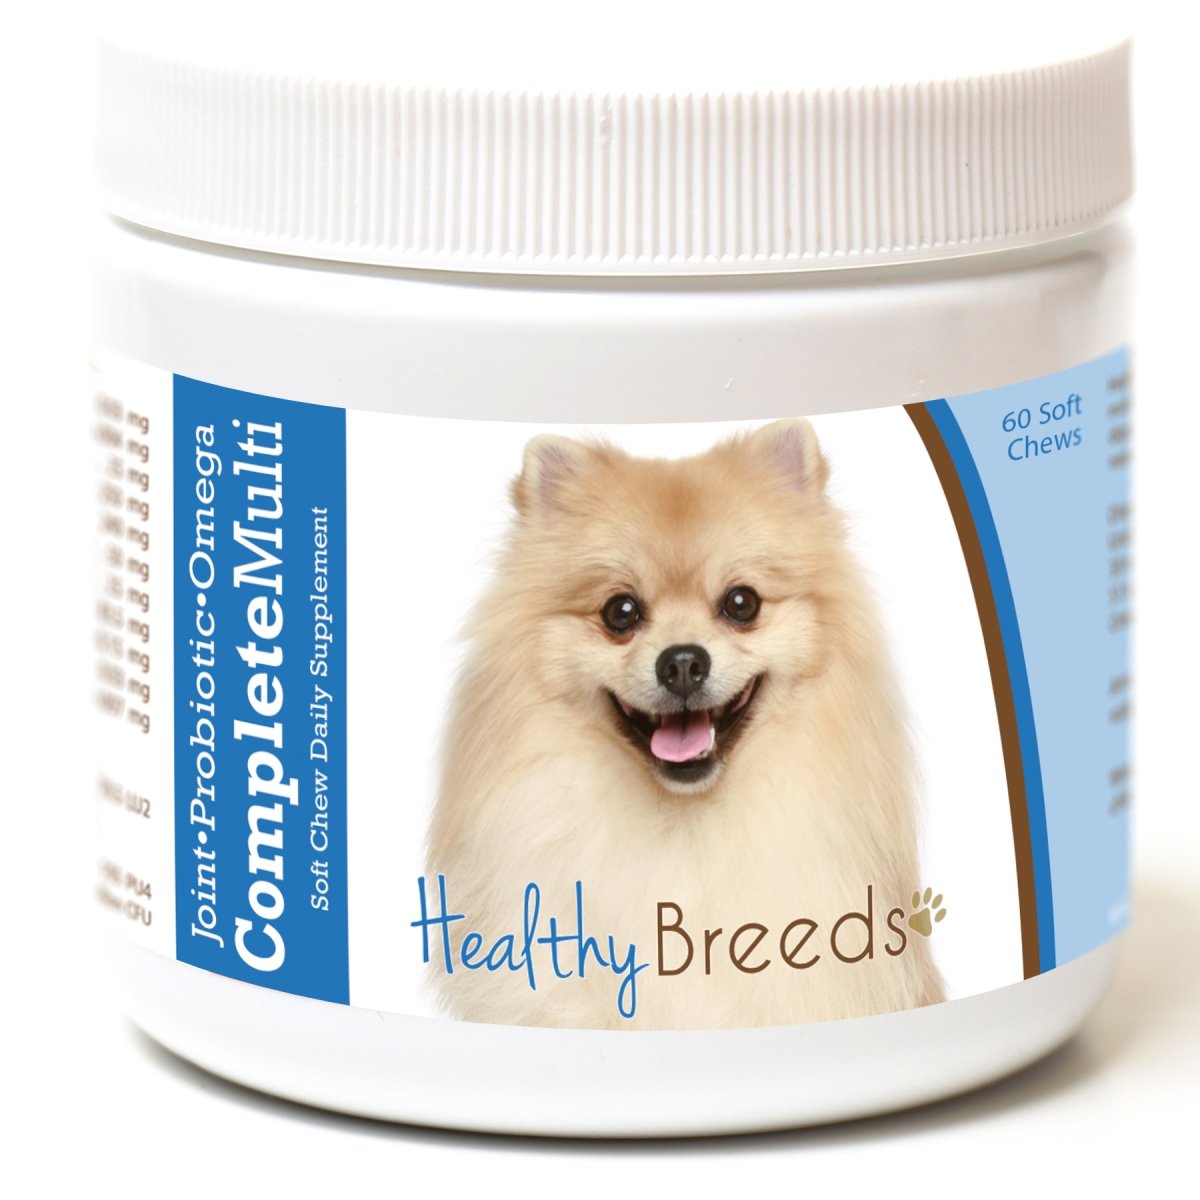 Picture of Healthy Breeds 192959008753 Pomeranian All in One Multivitamin Soft Chew - 60 Count